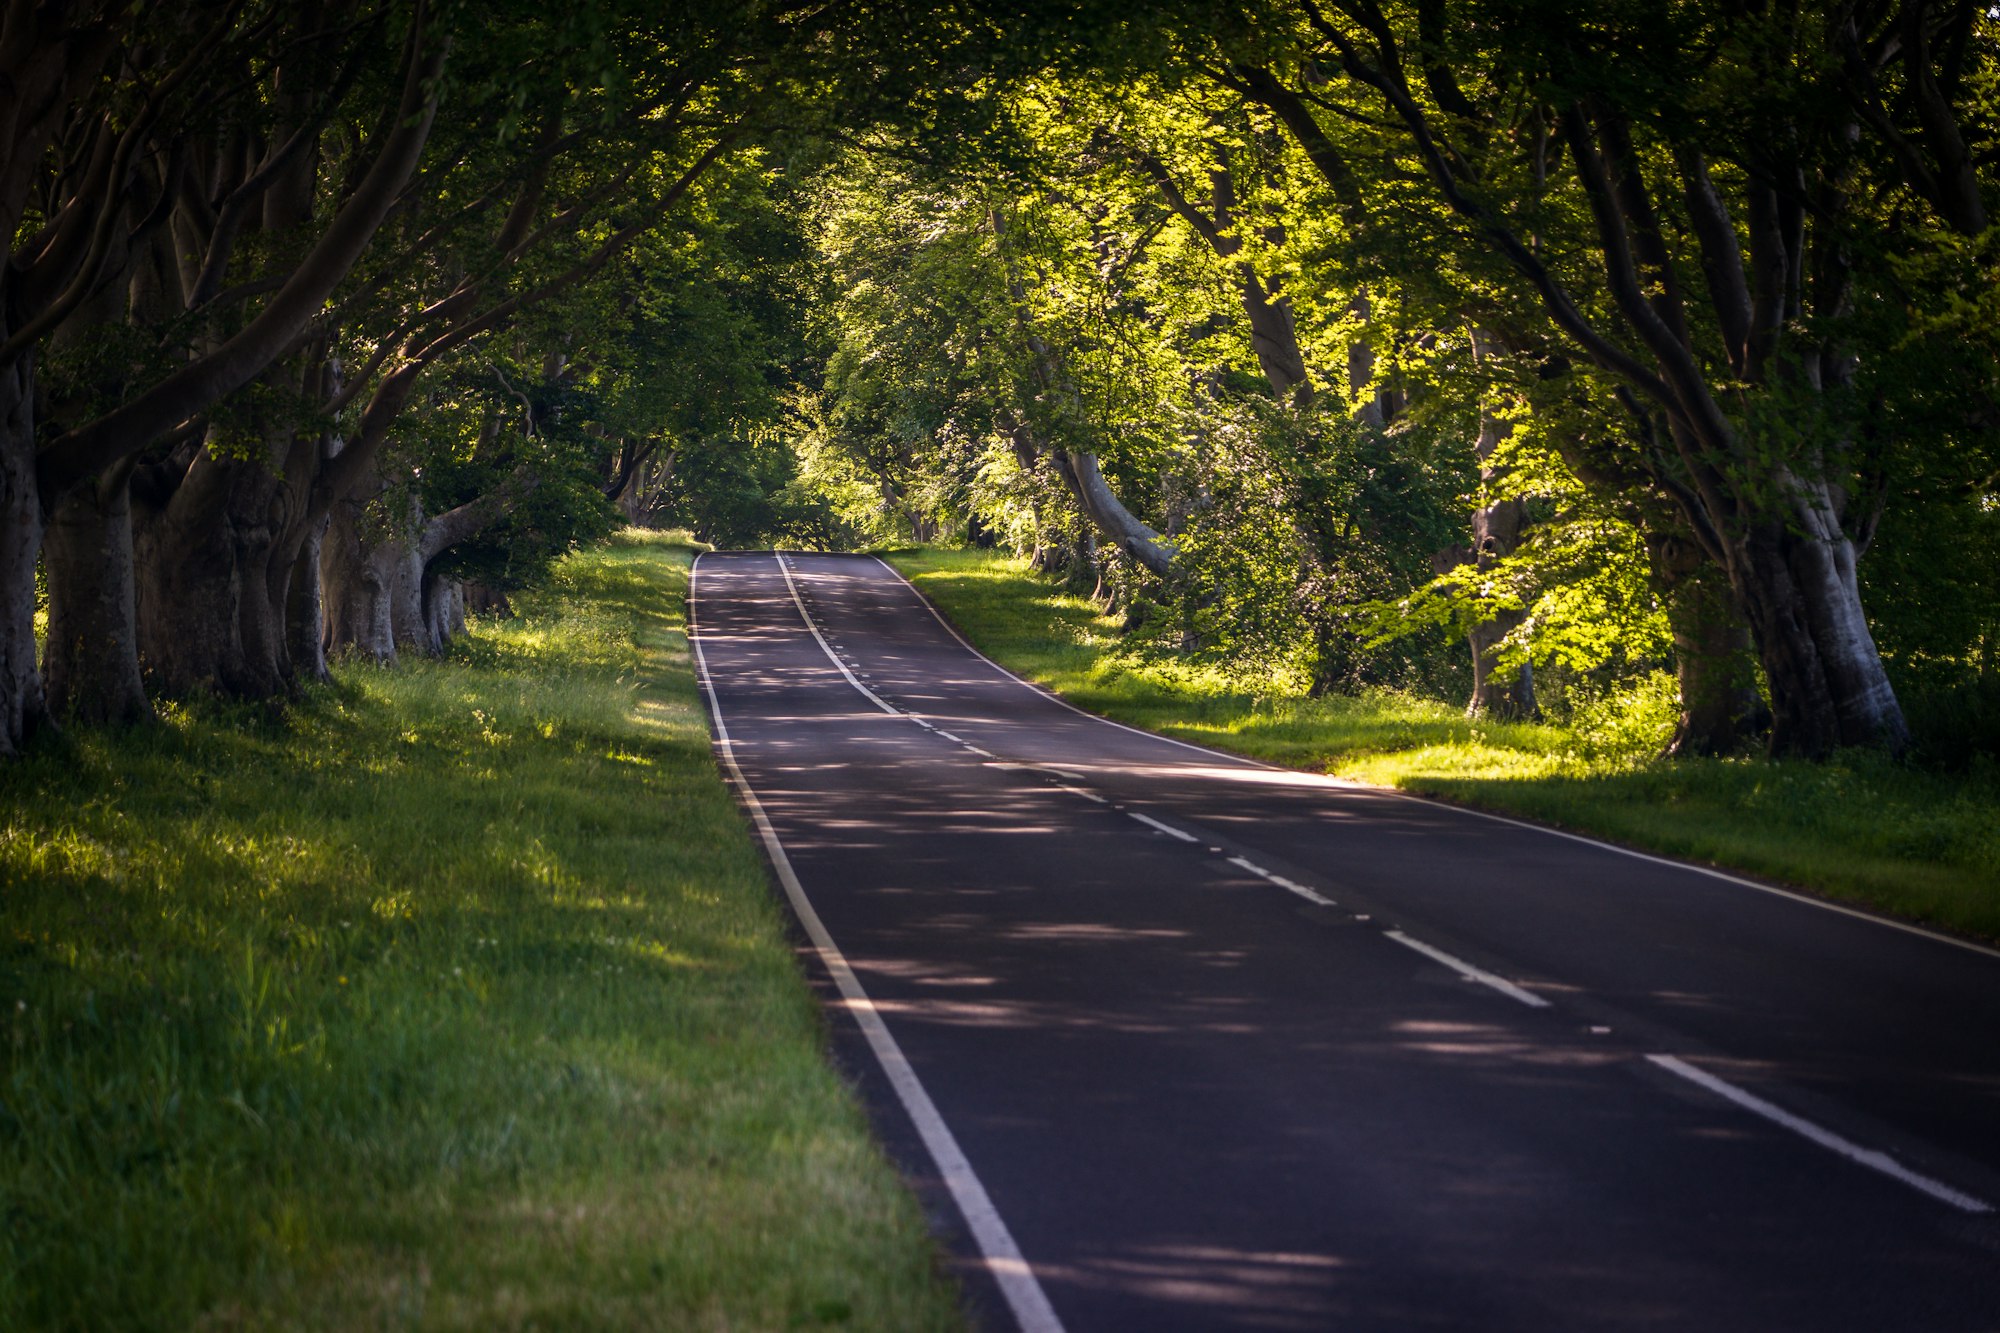 One of the most scenic roads in Dorset, near Badbury Rings and lined with trees.  Beautiful at any time of the year, however moreso, when the trees are in full blossom with leaves.